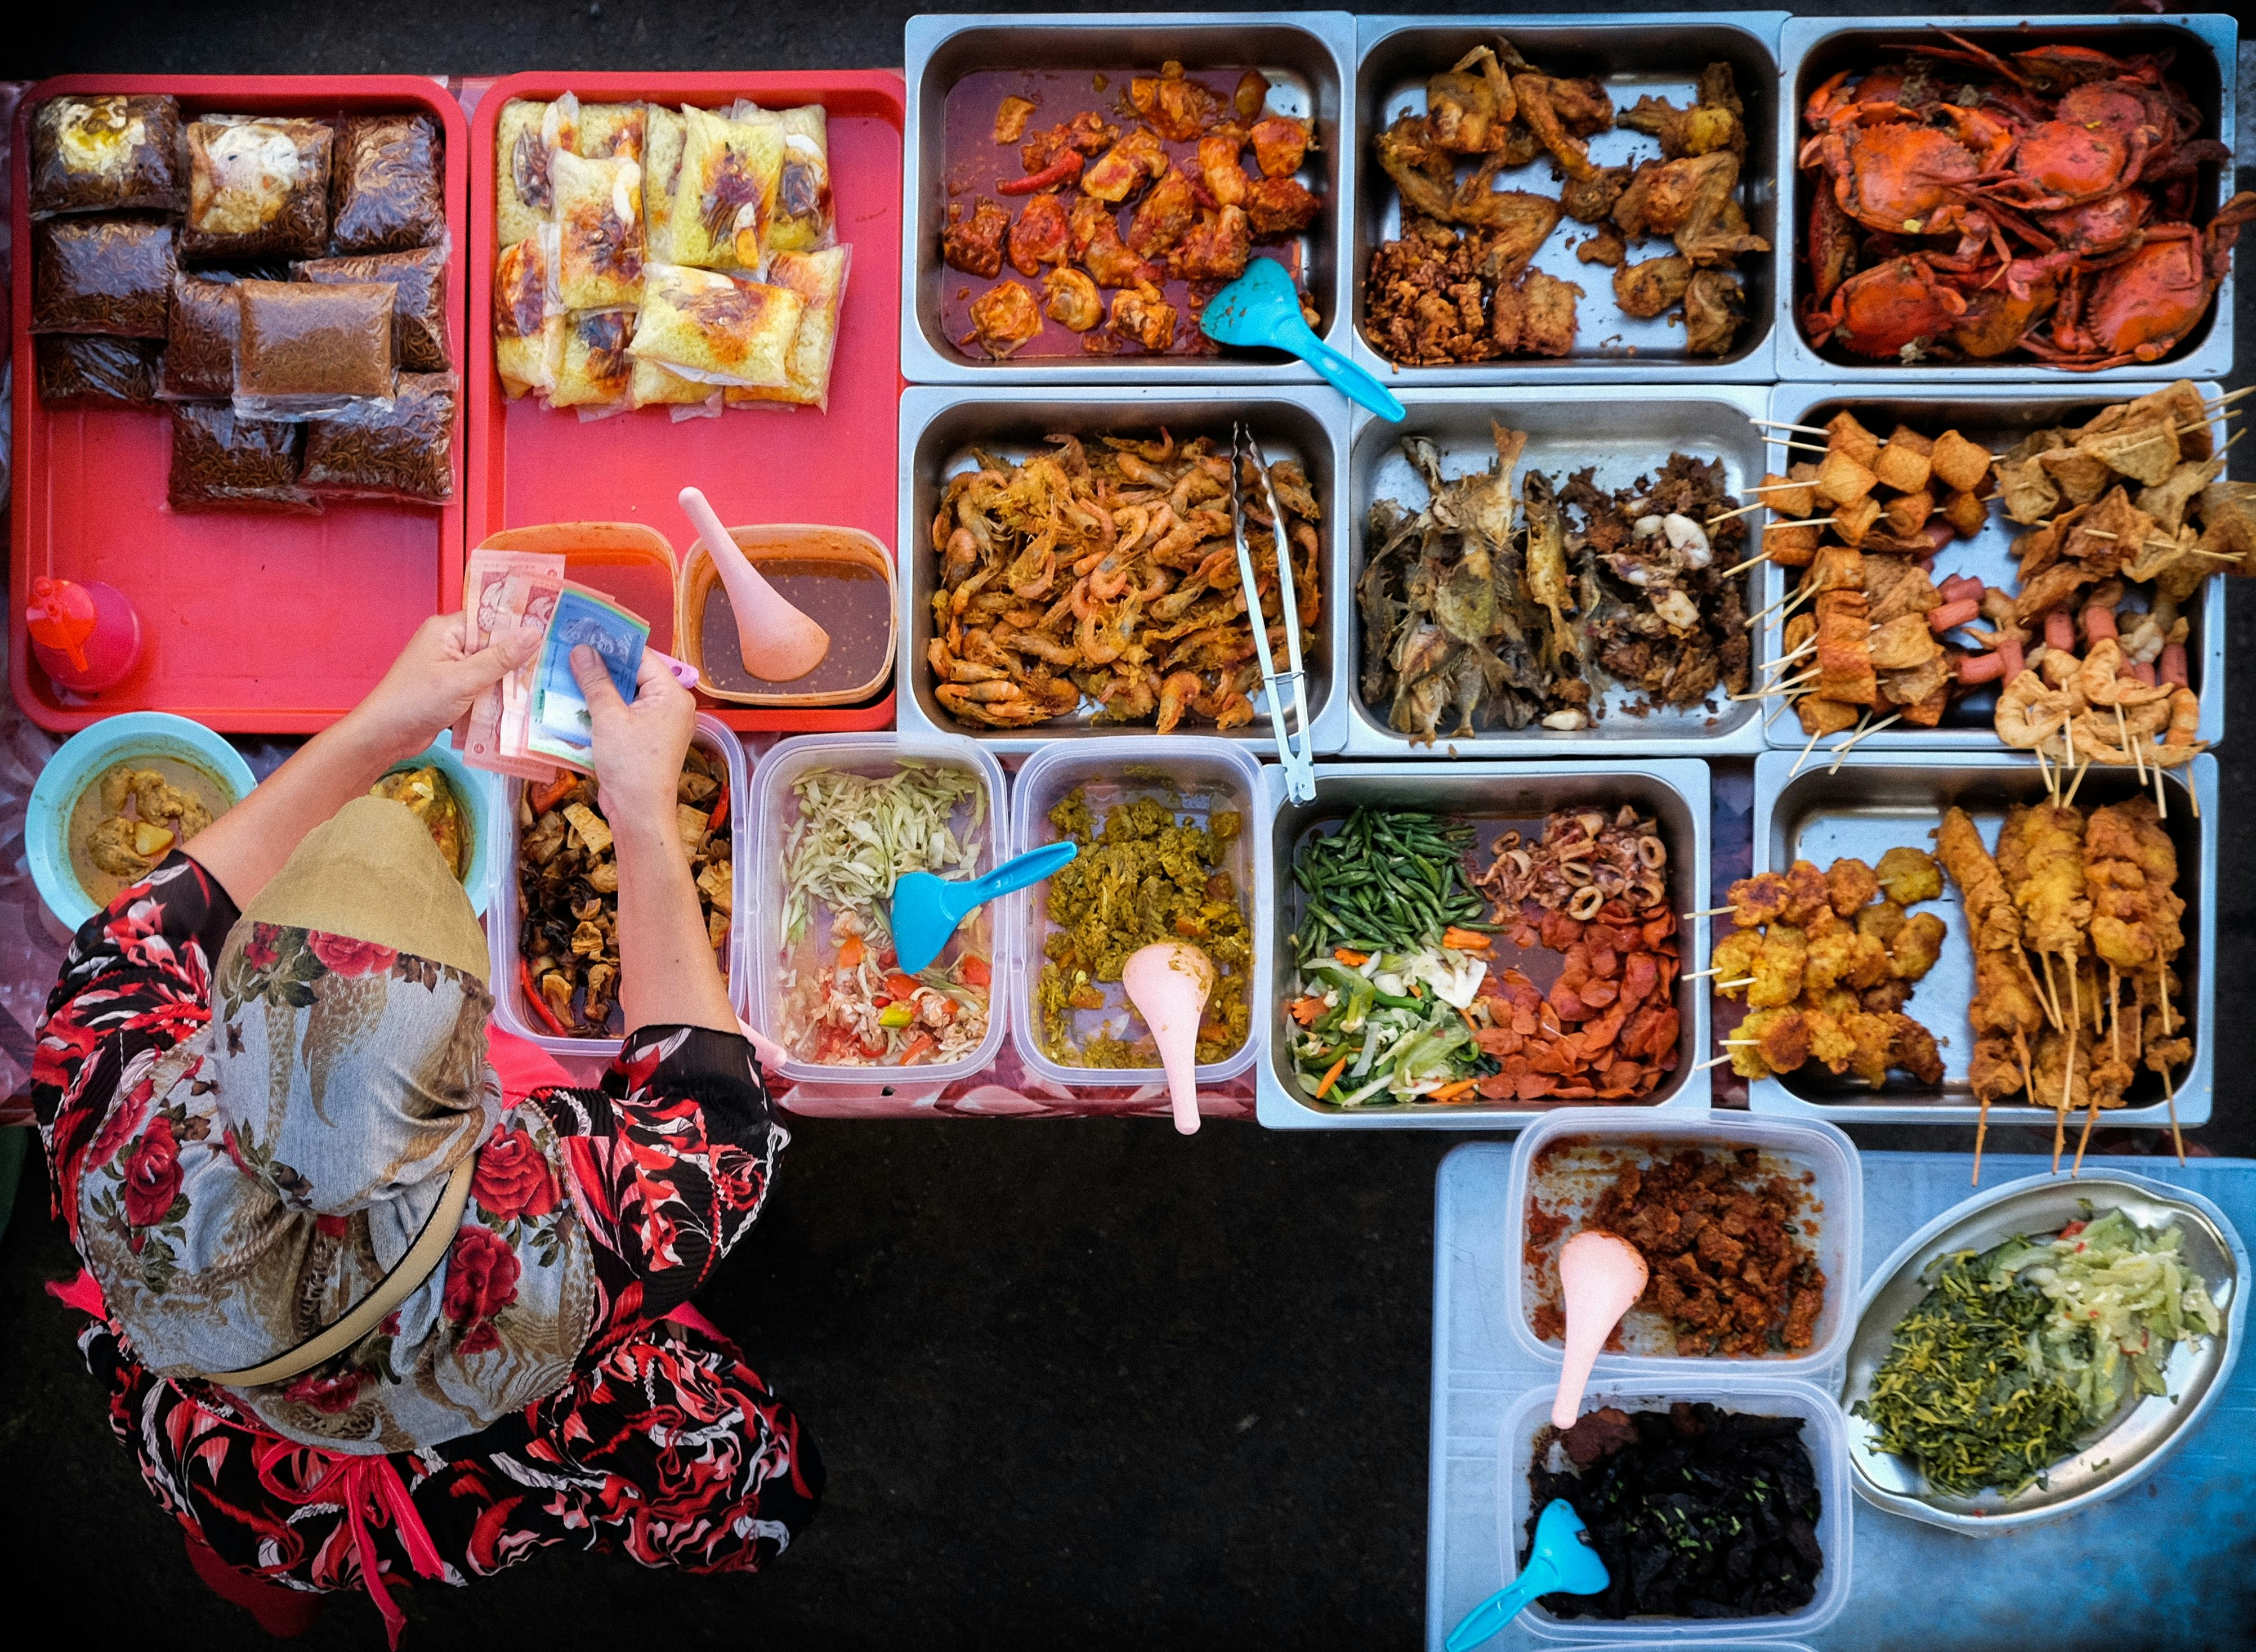 A top-down shot of a woman counting money at a food stall. The stall is filled with trays of colourful, Asian-style cuisine.